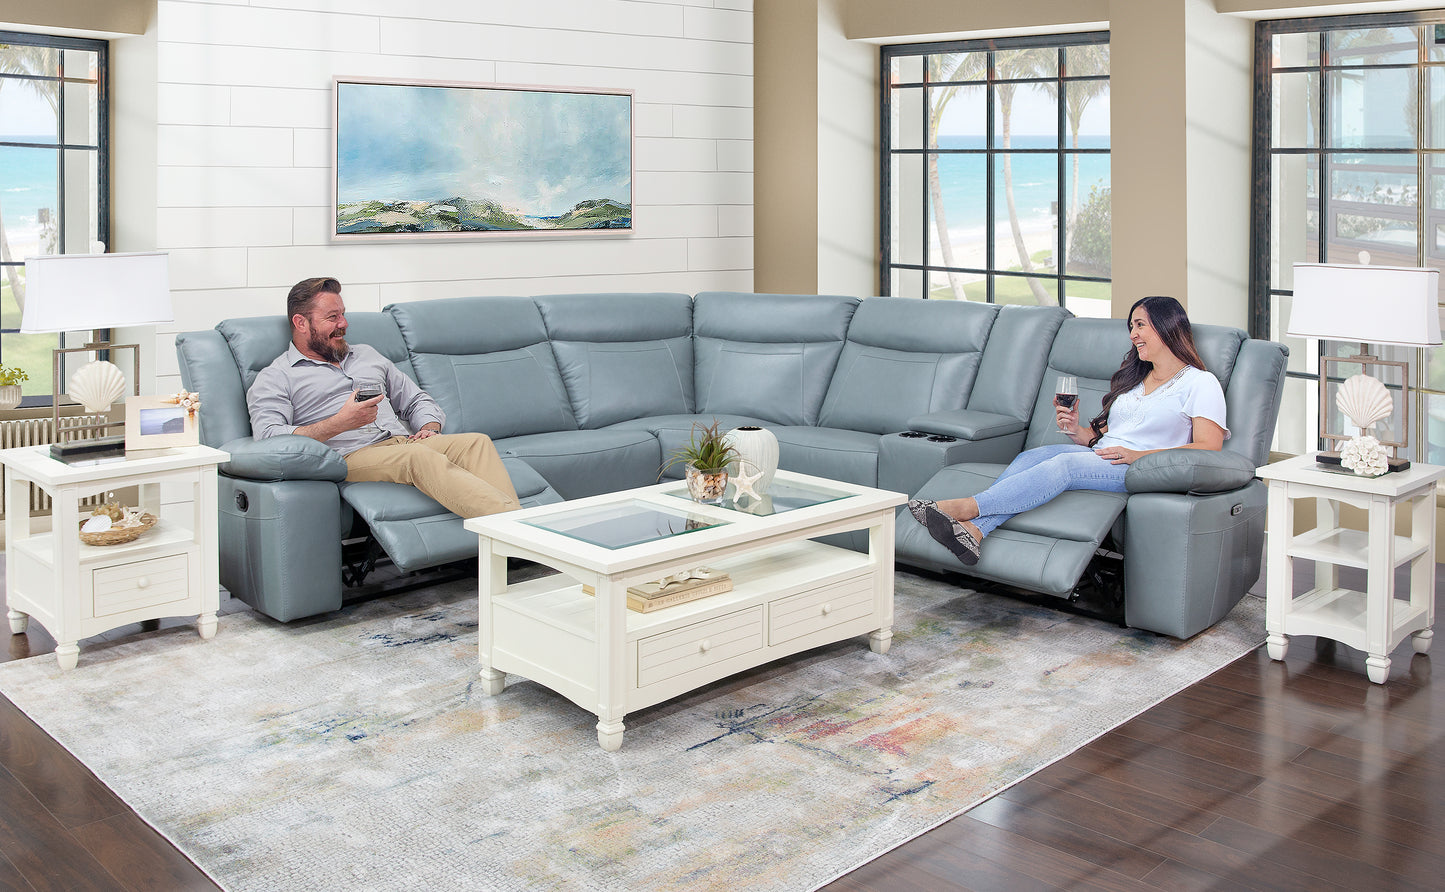 Dallas Teal 9 Piece Leather Reclining Living Room